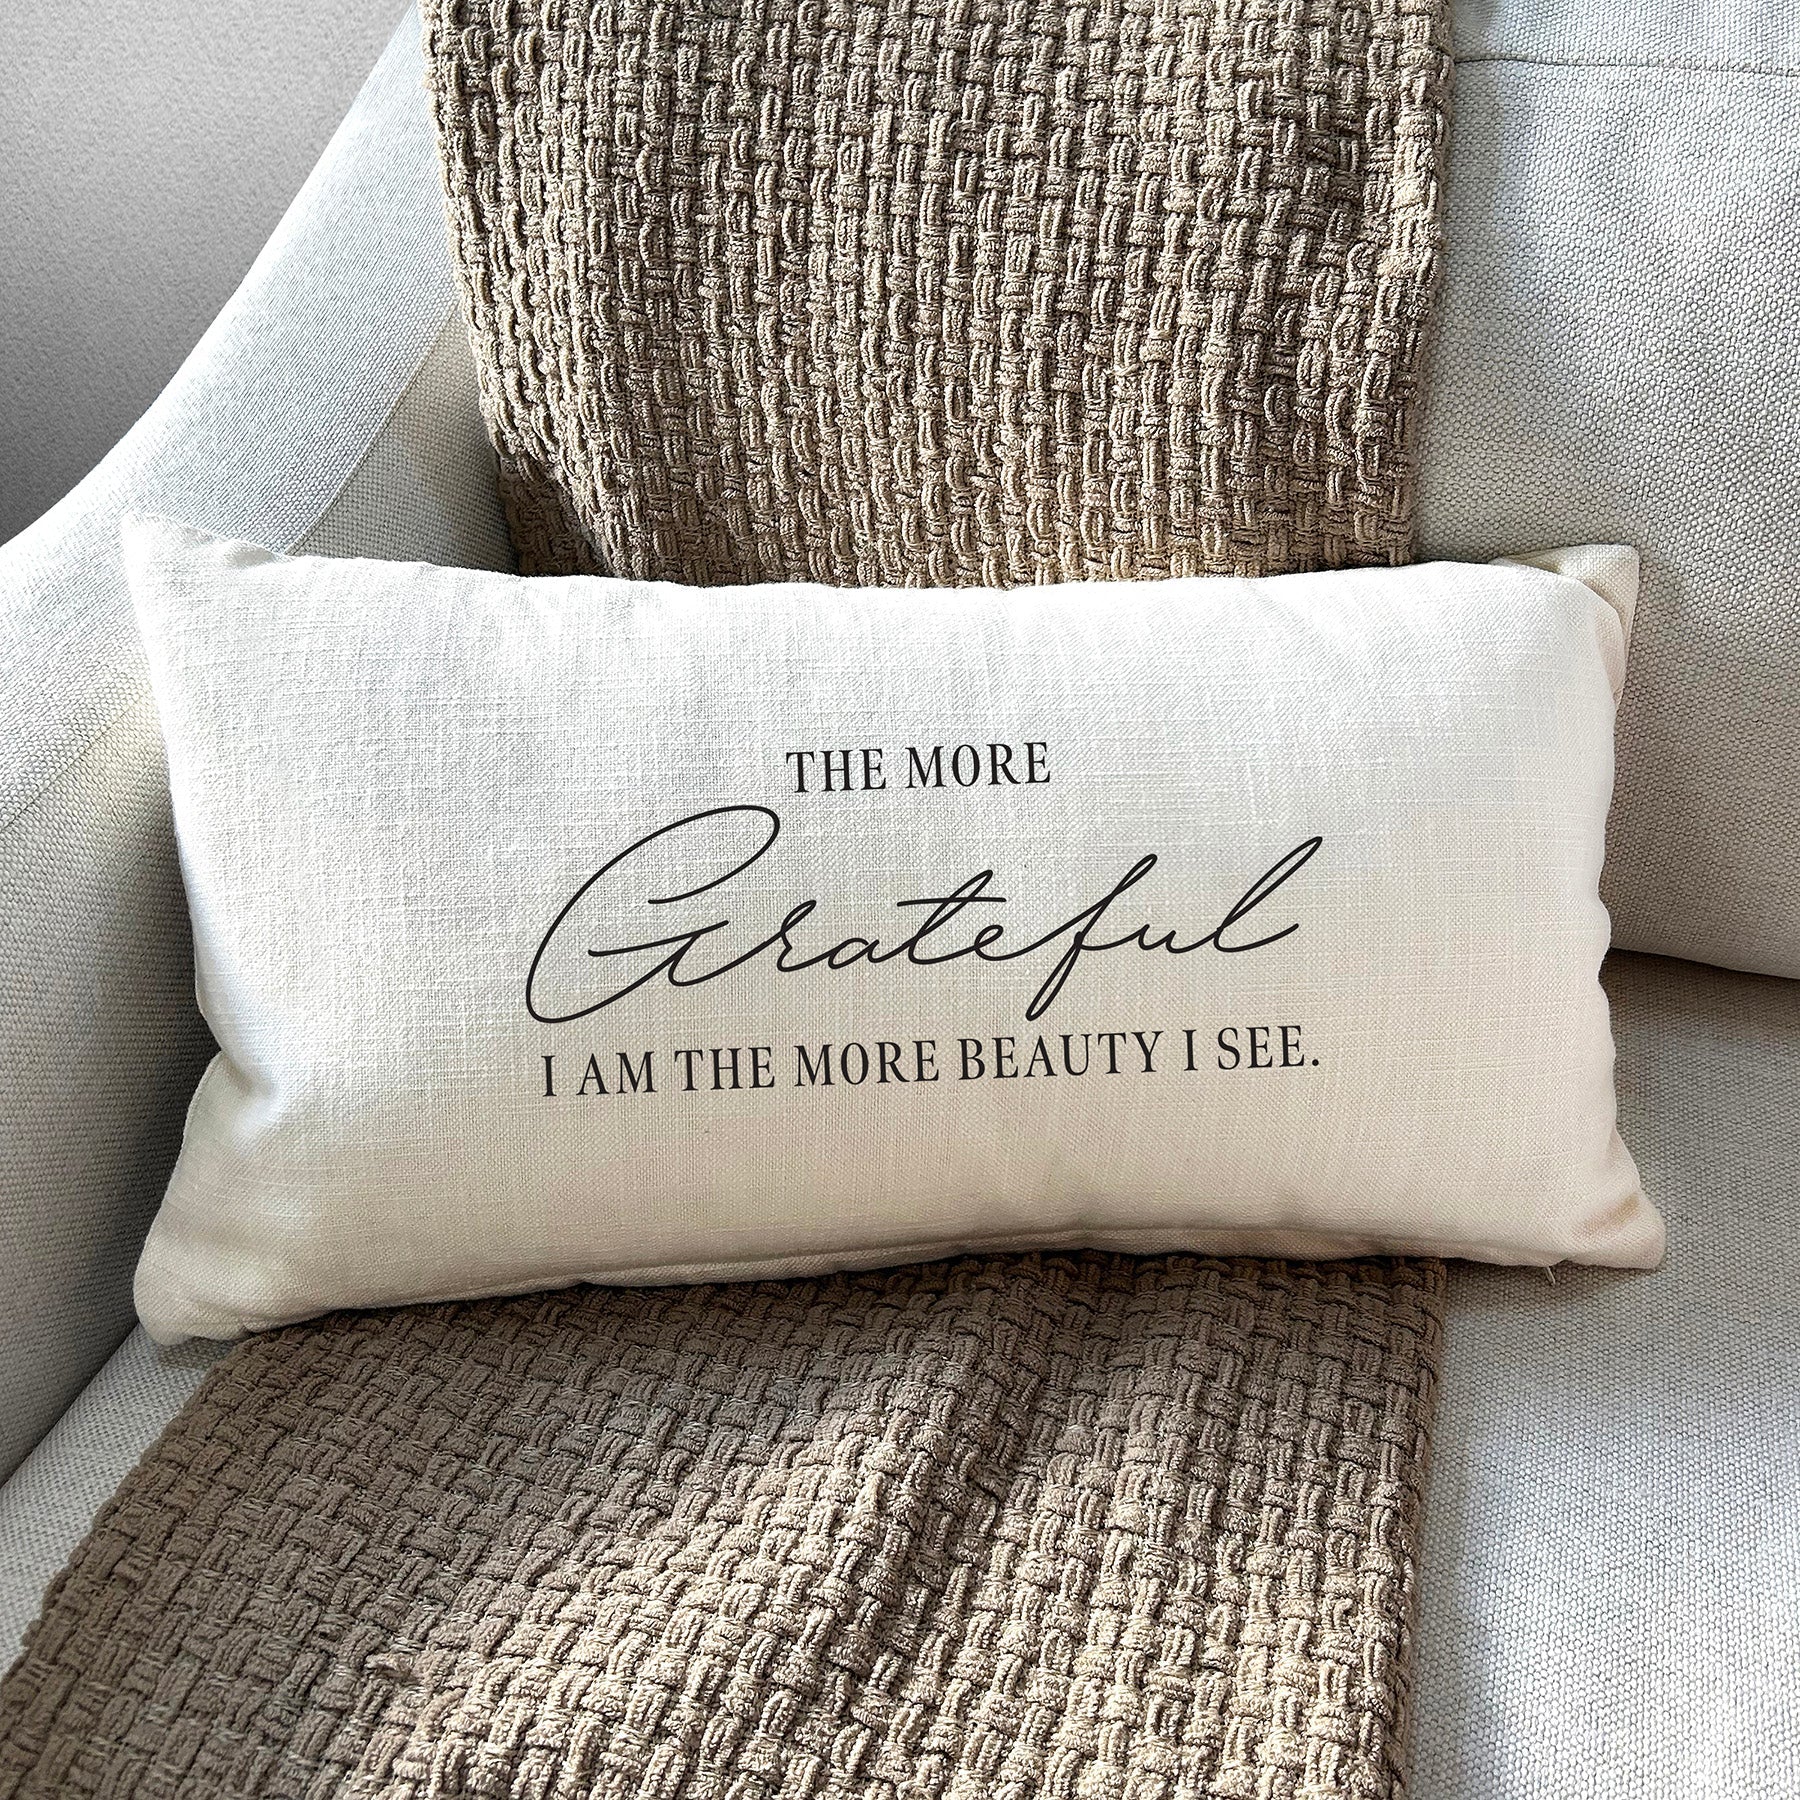 The more Grateful I am the more beauty I see / Lumbar Pillow Cover